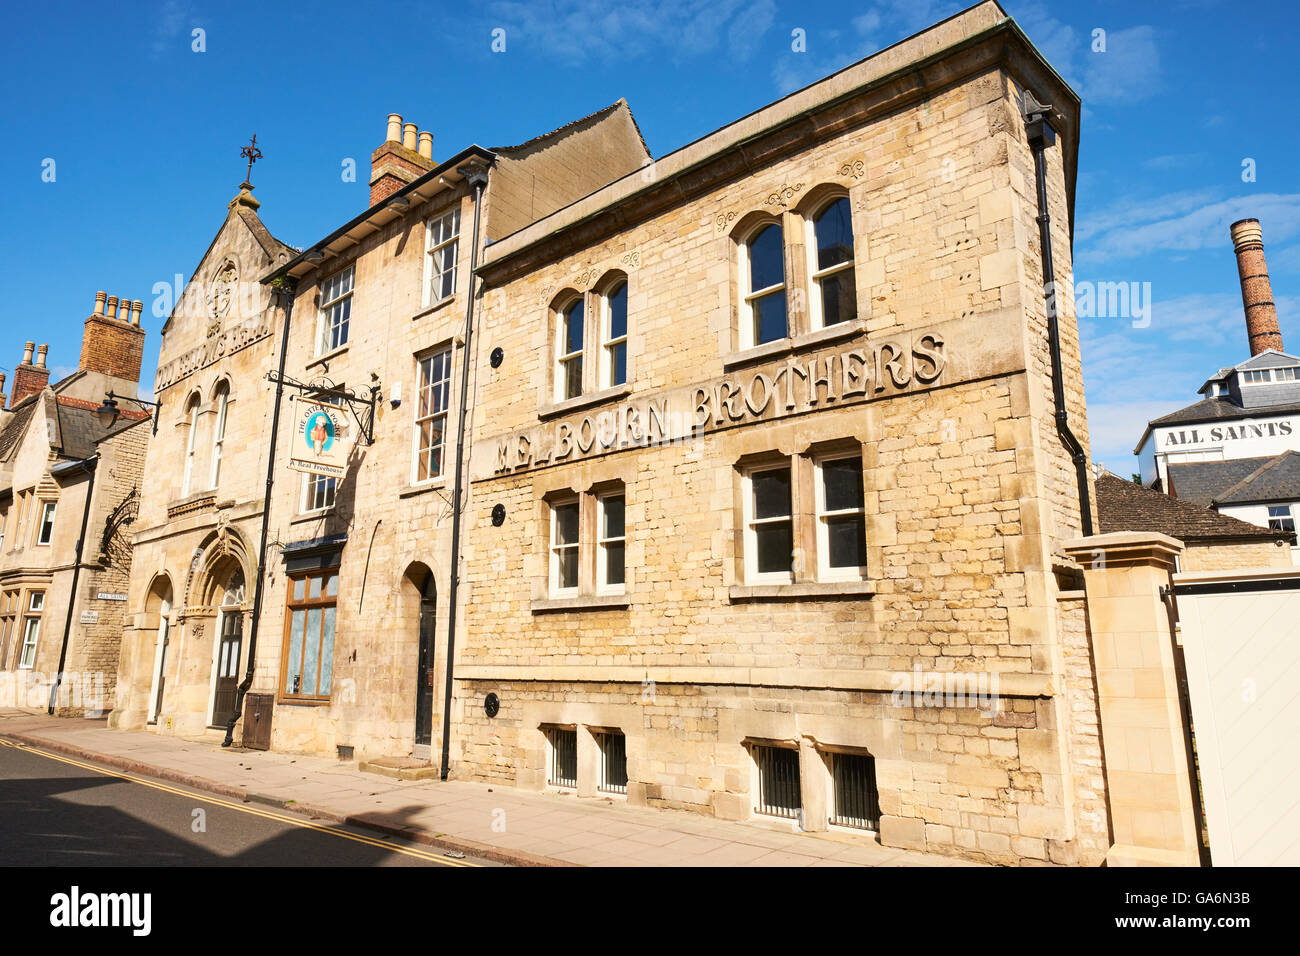 Melbourn Brothers And All Saints Brewery All Saints Street Stamford Lincolnshire UK Stock Photo